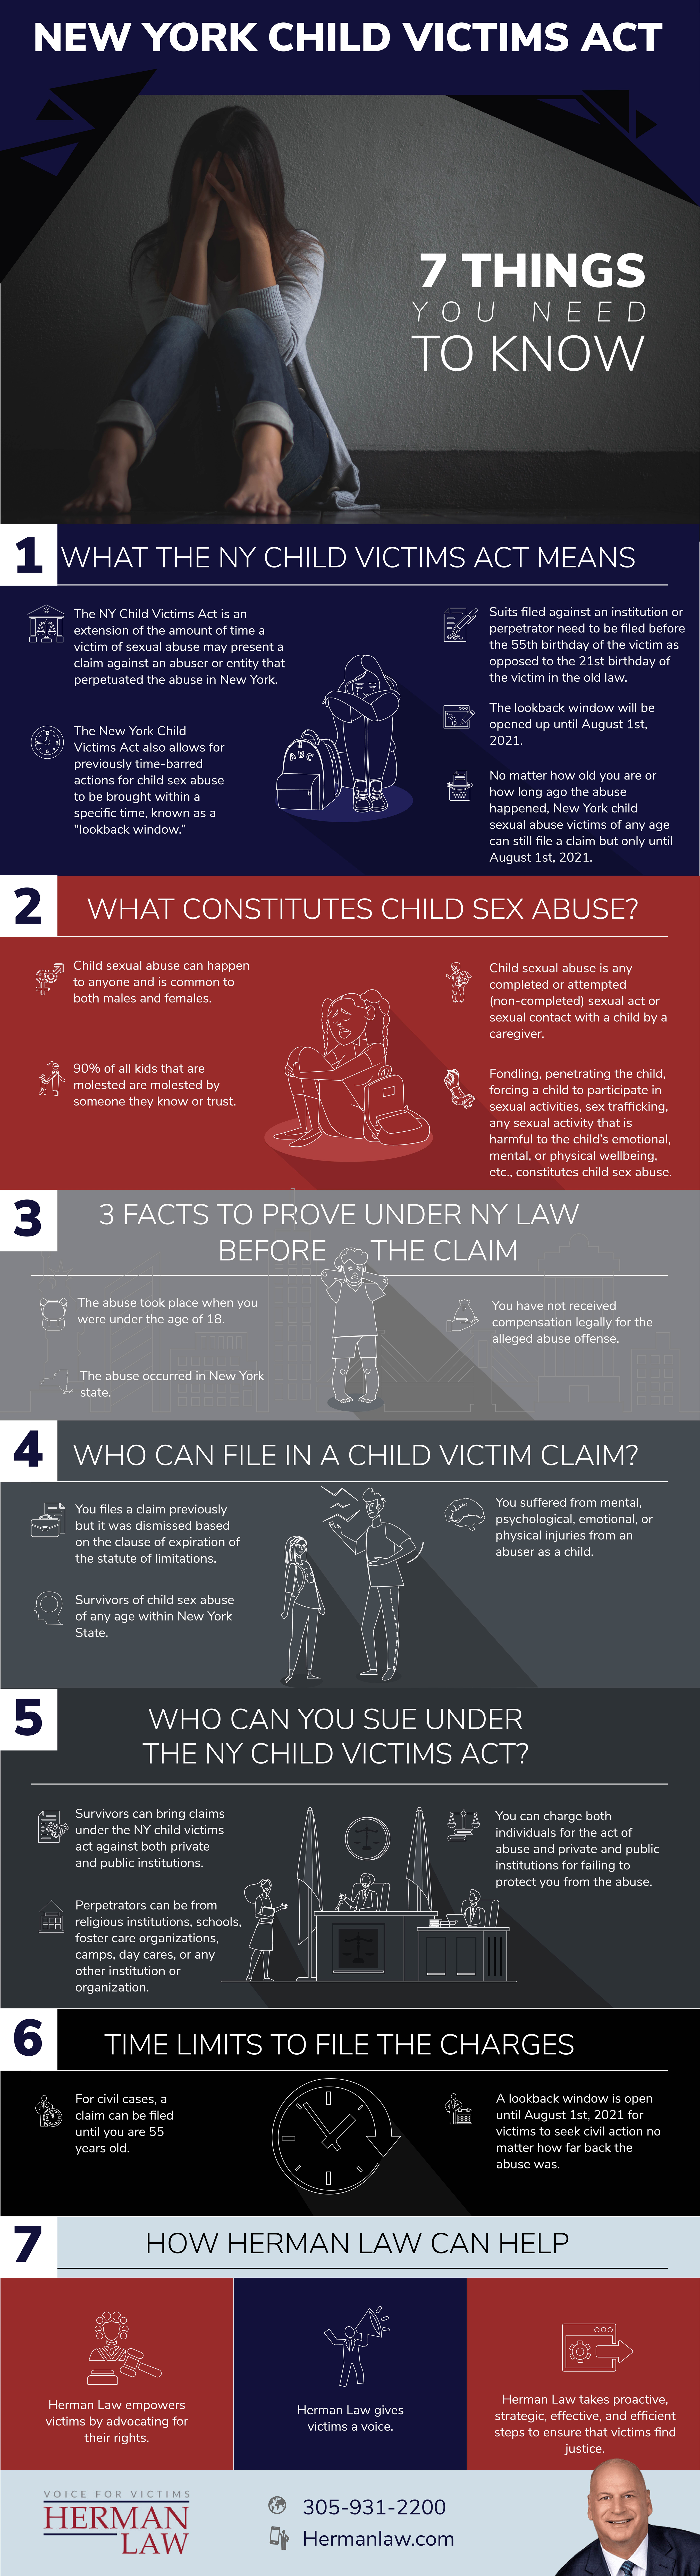 New York Child Victims Act Herman Law